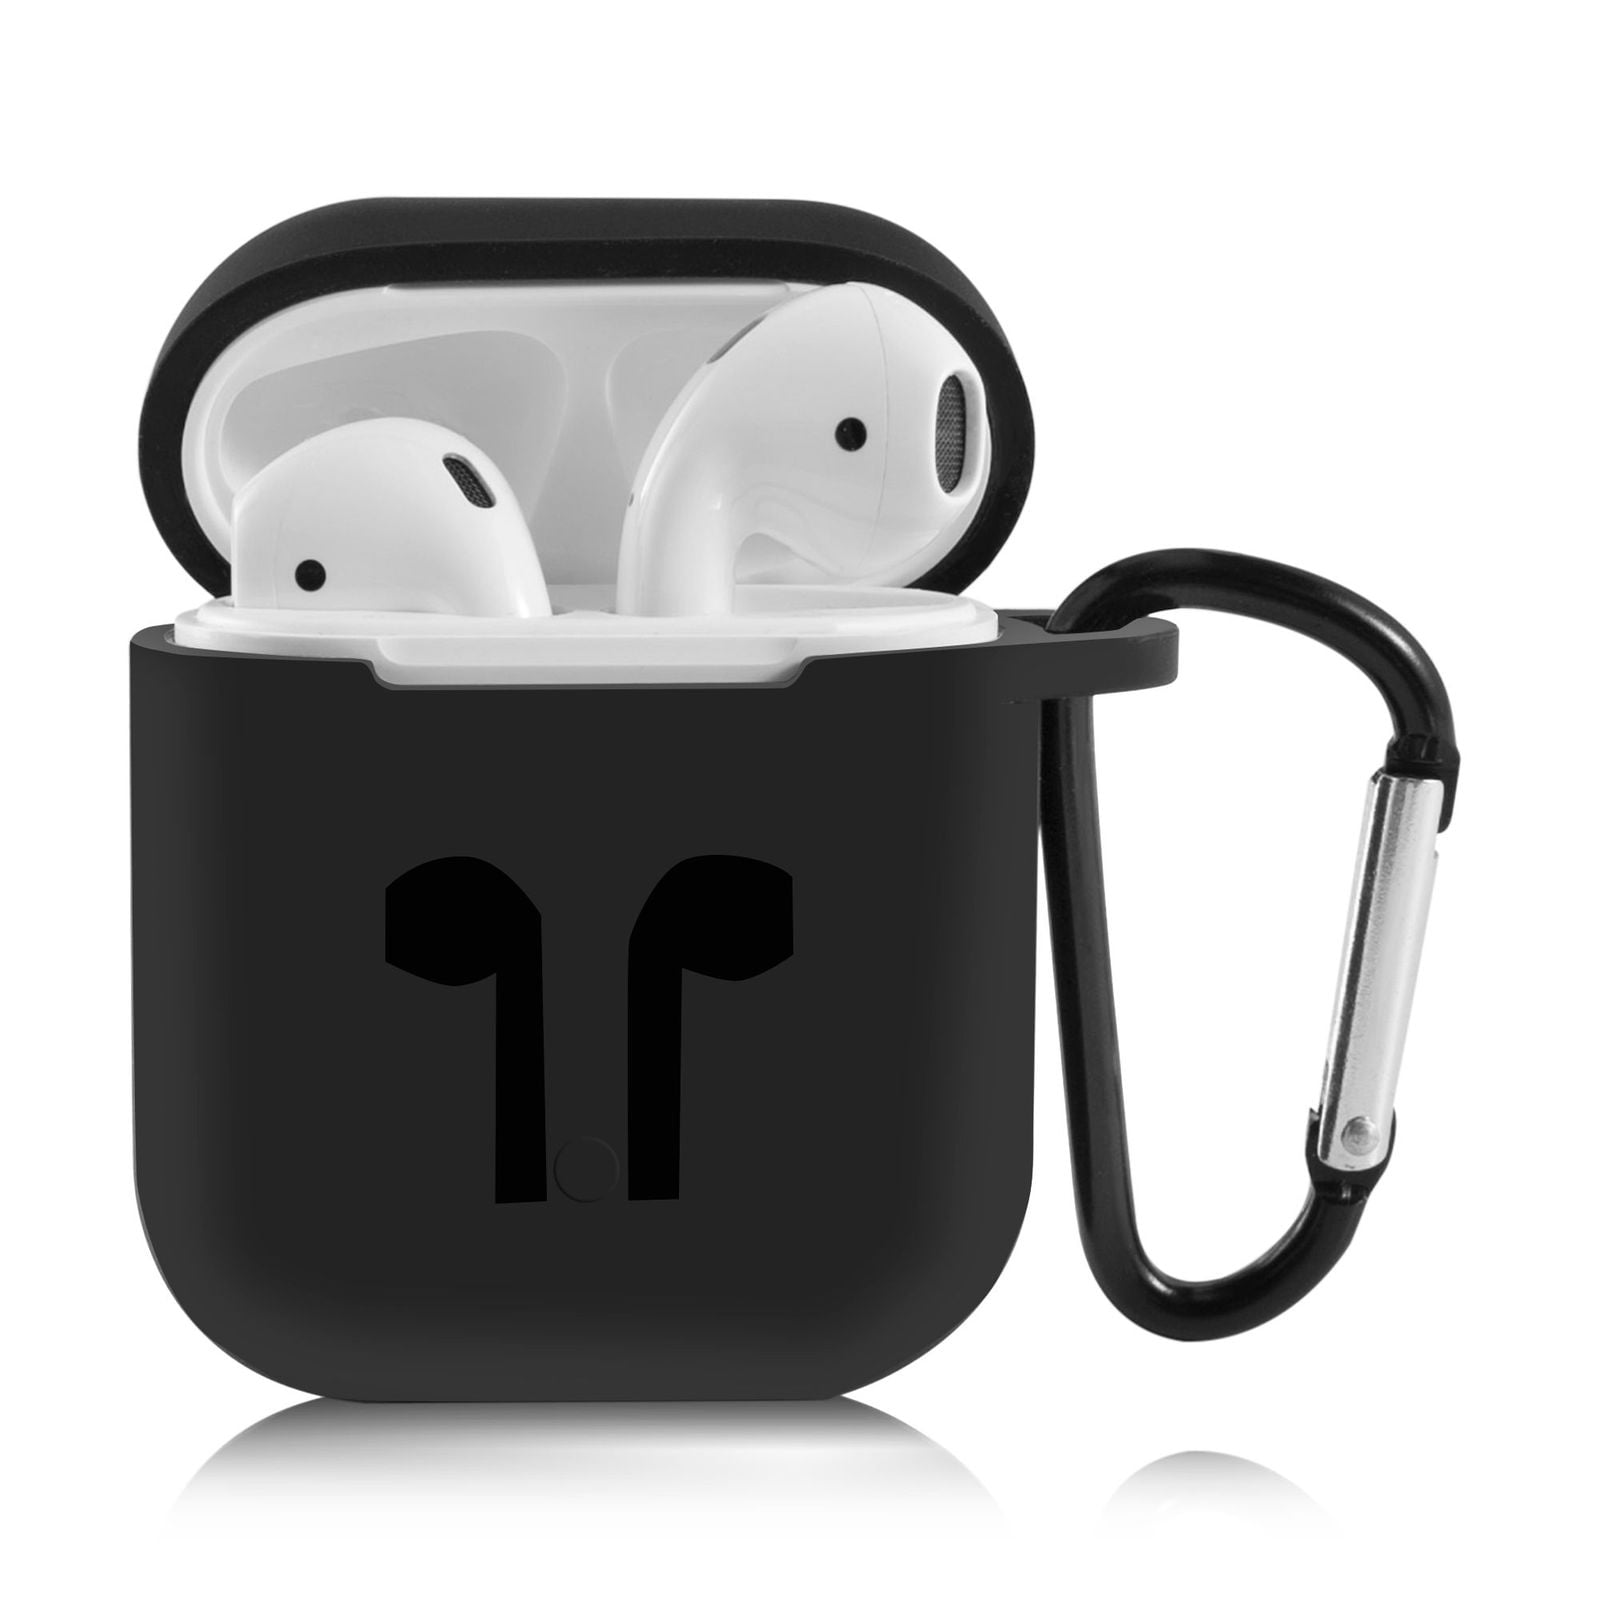 TANGABA AirPods Case Cover for AirPod 2&1, Full-Body Protective Hard Shell  Leather Airpods Protective Cover Case with Keychain for AirPods Wireless